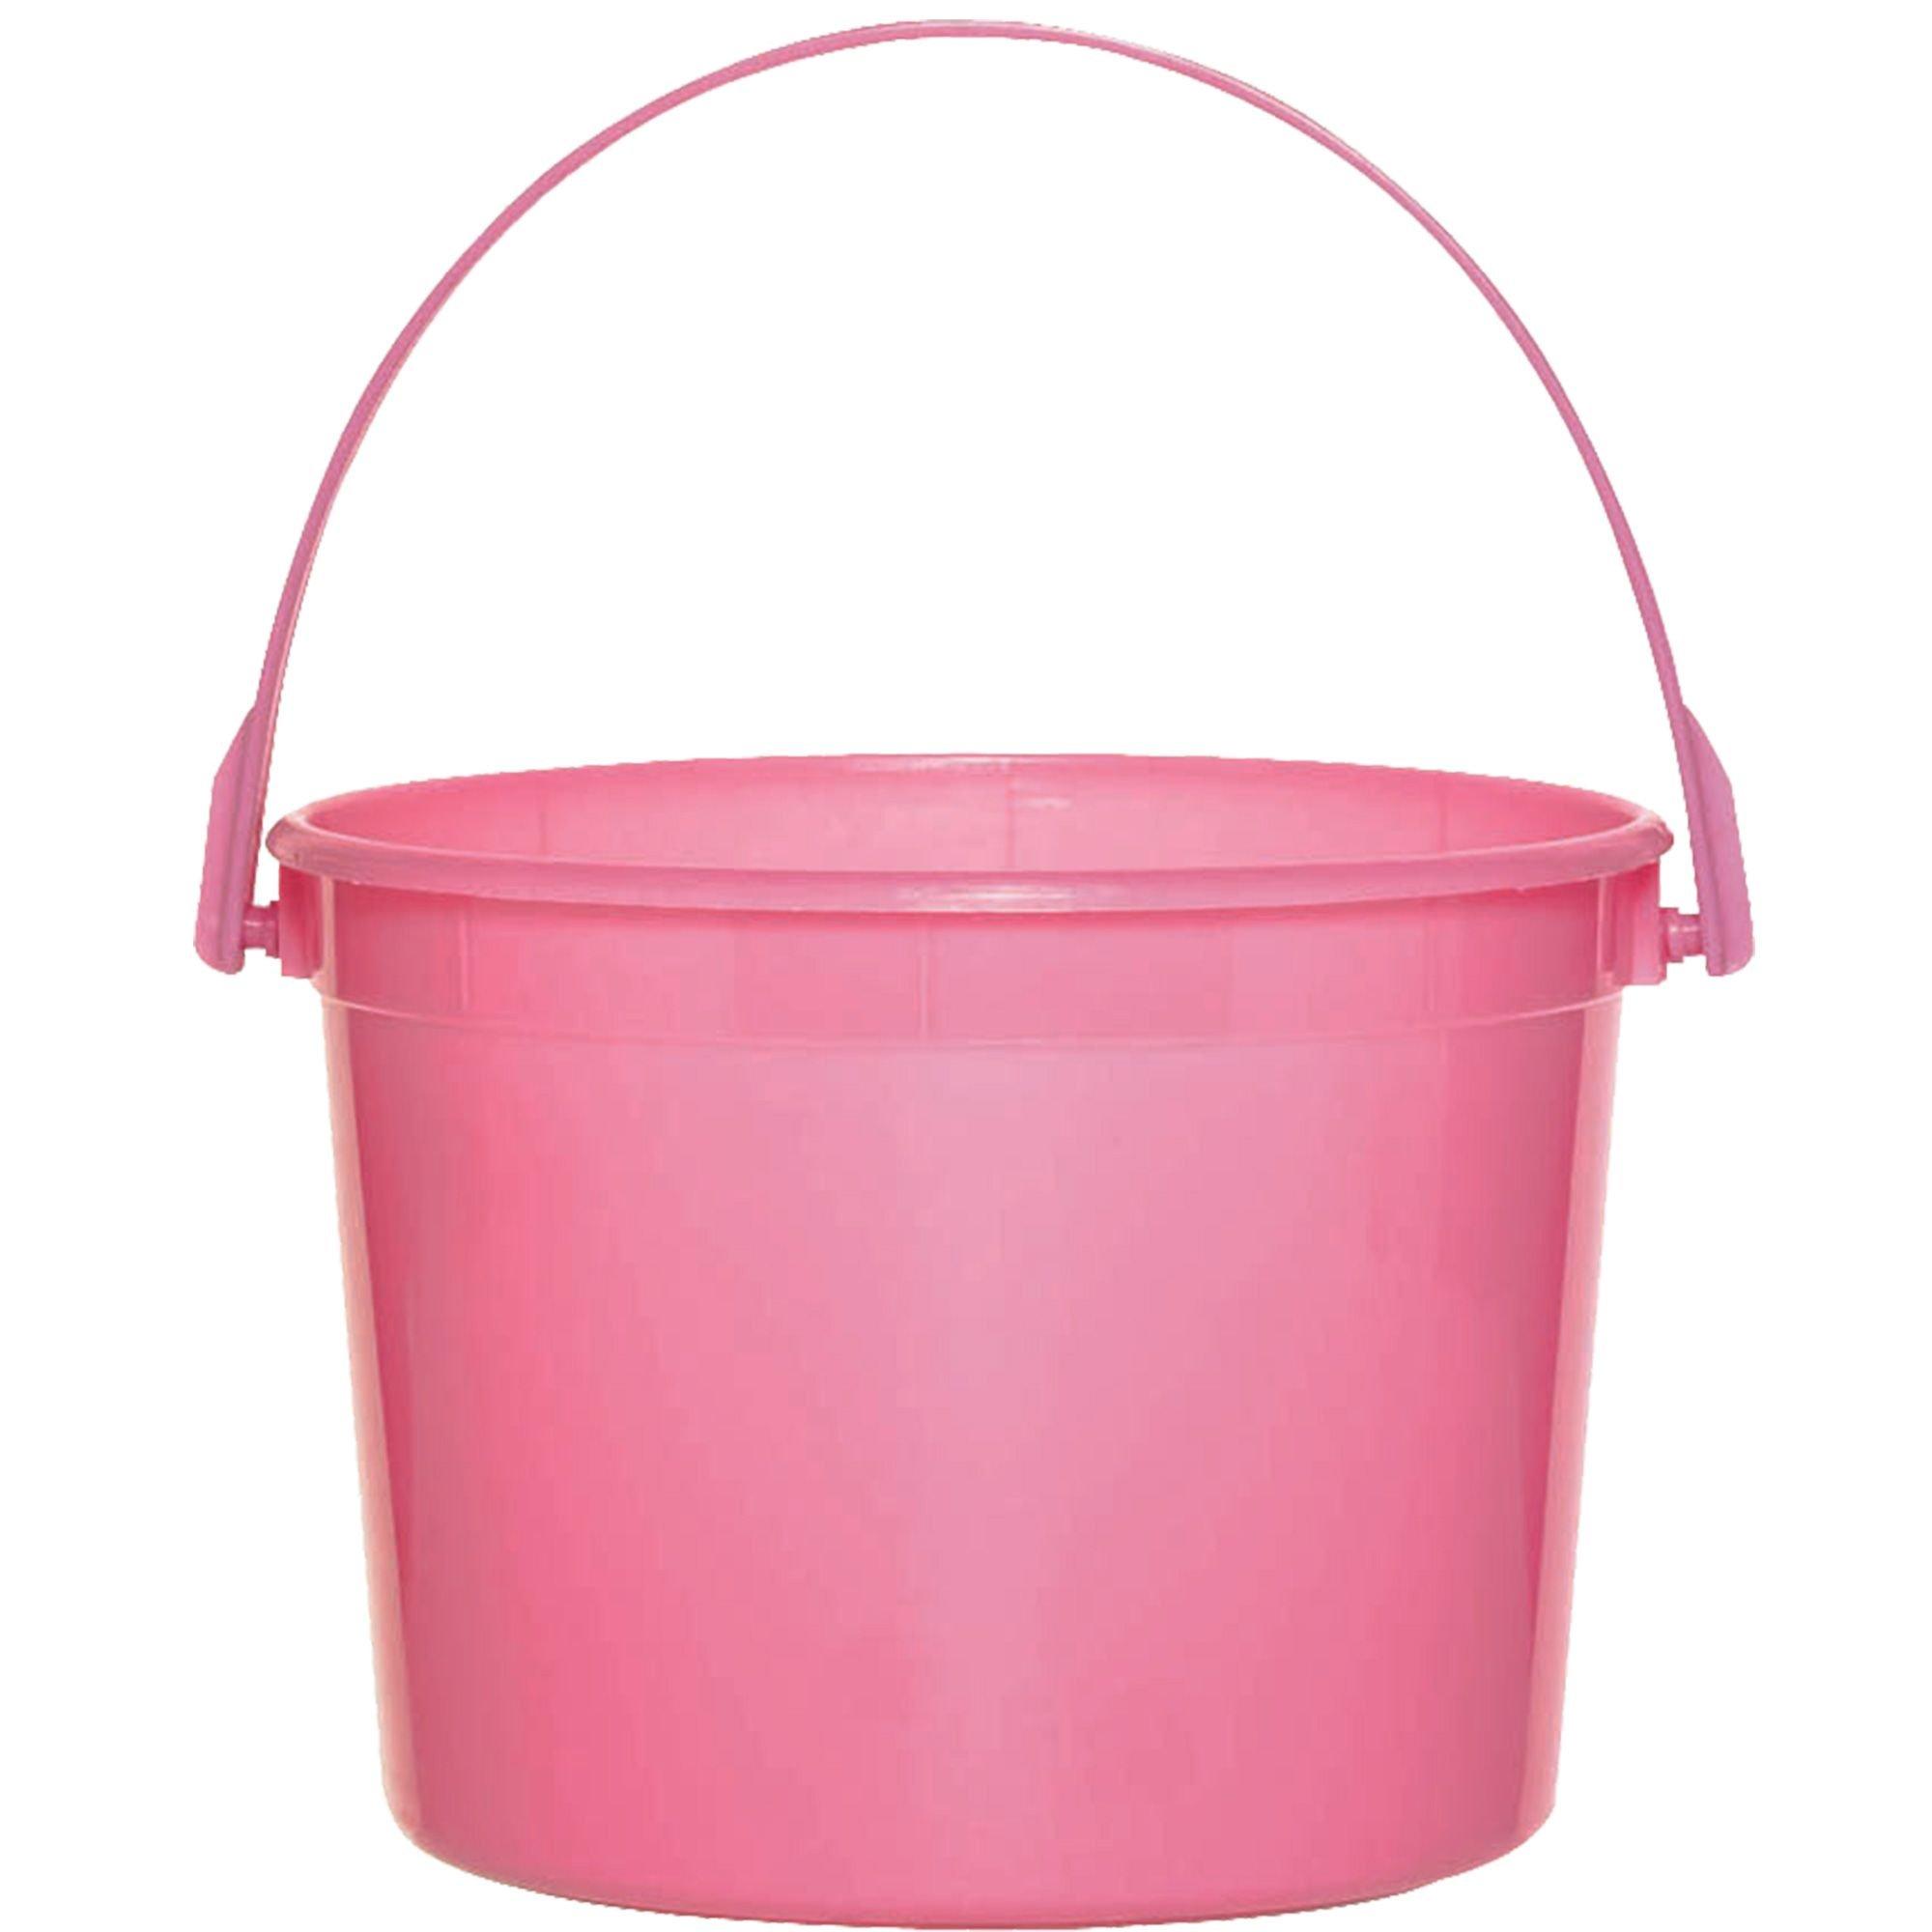 Plastic Round Favor Container with Lid, 3-inch, Small, Light Pink